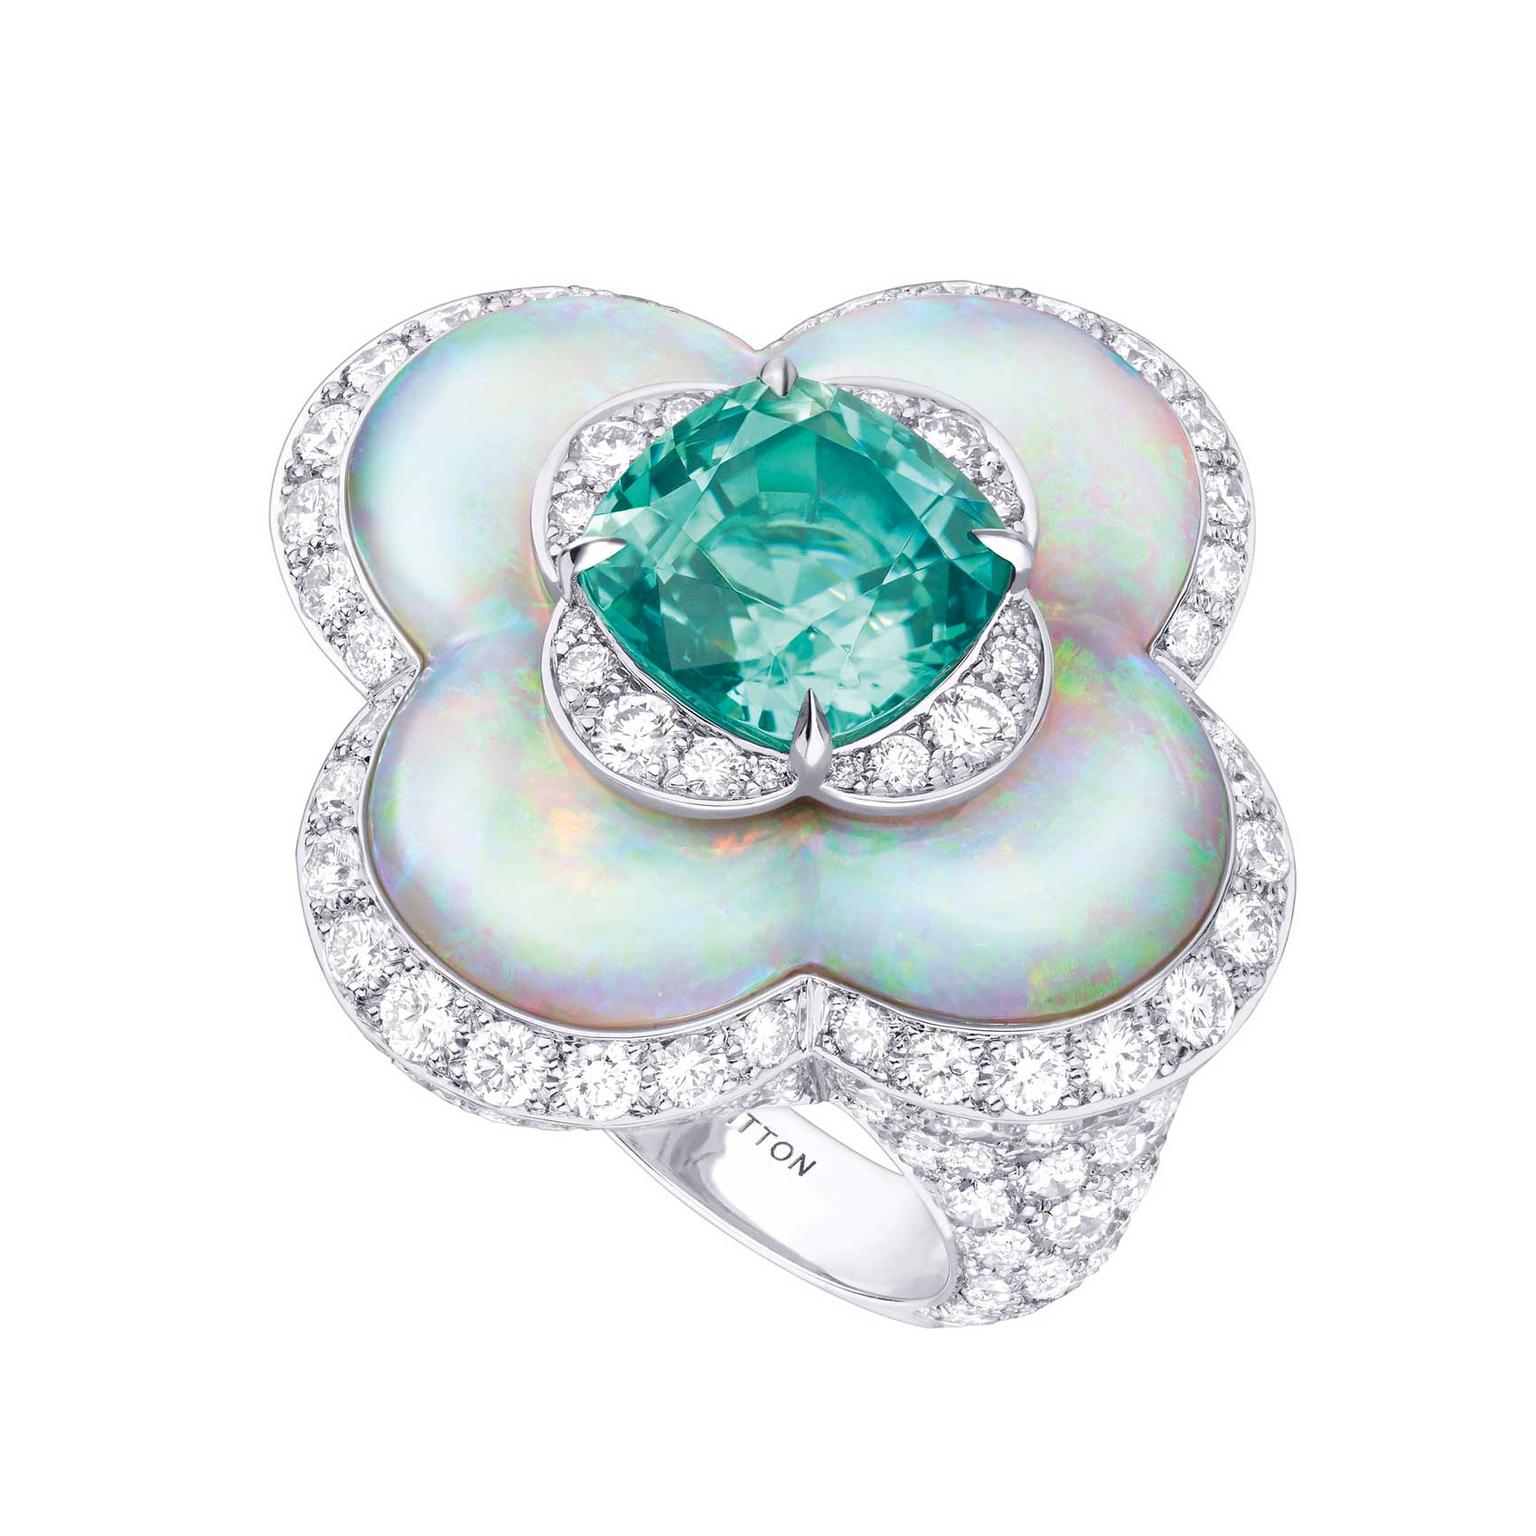 Blossom high jewellery opal and tourmaline ring, Louis Vuitton